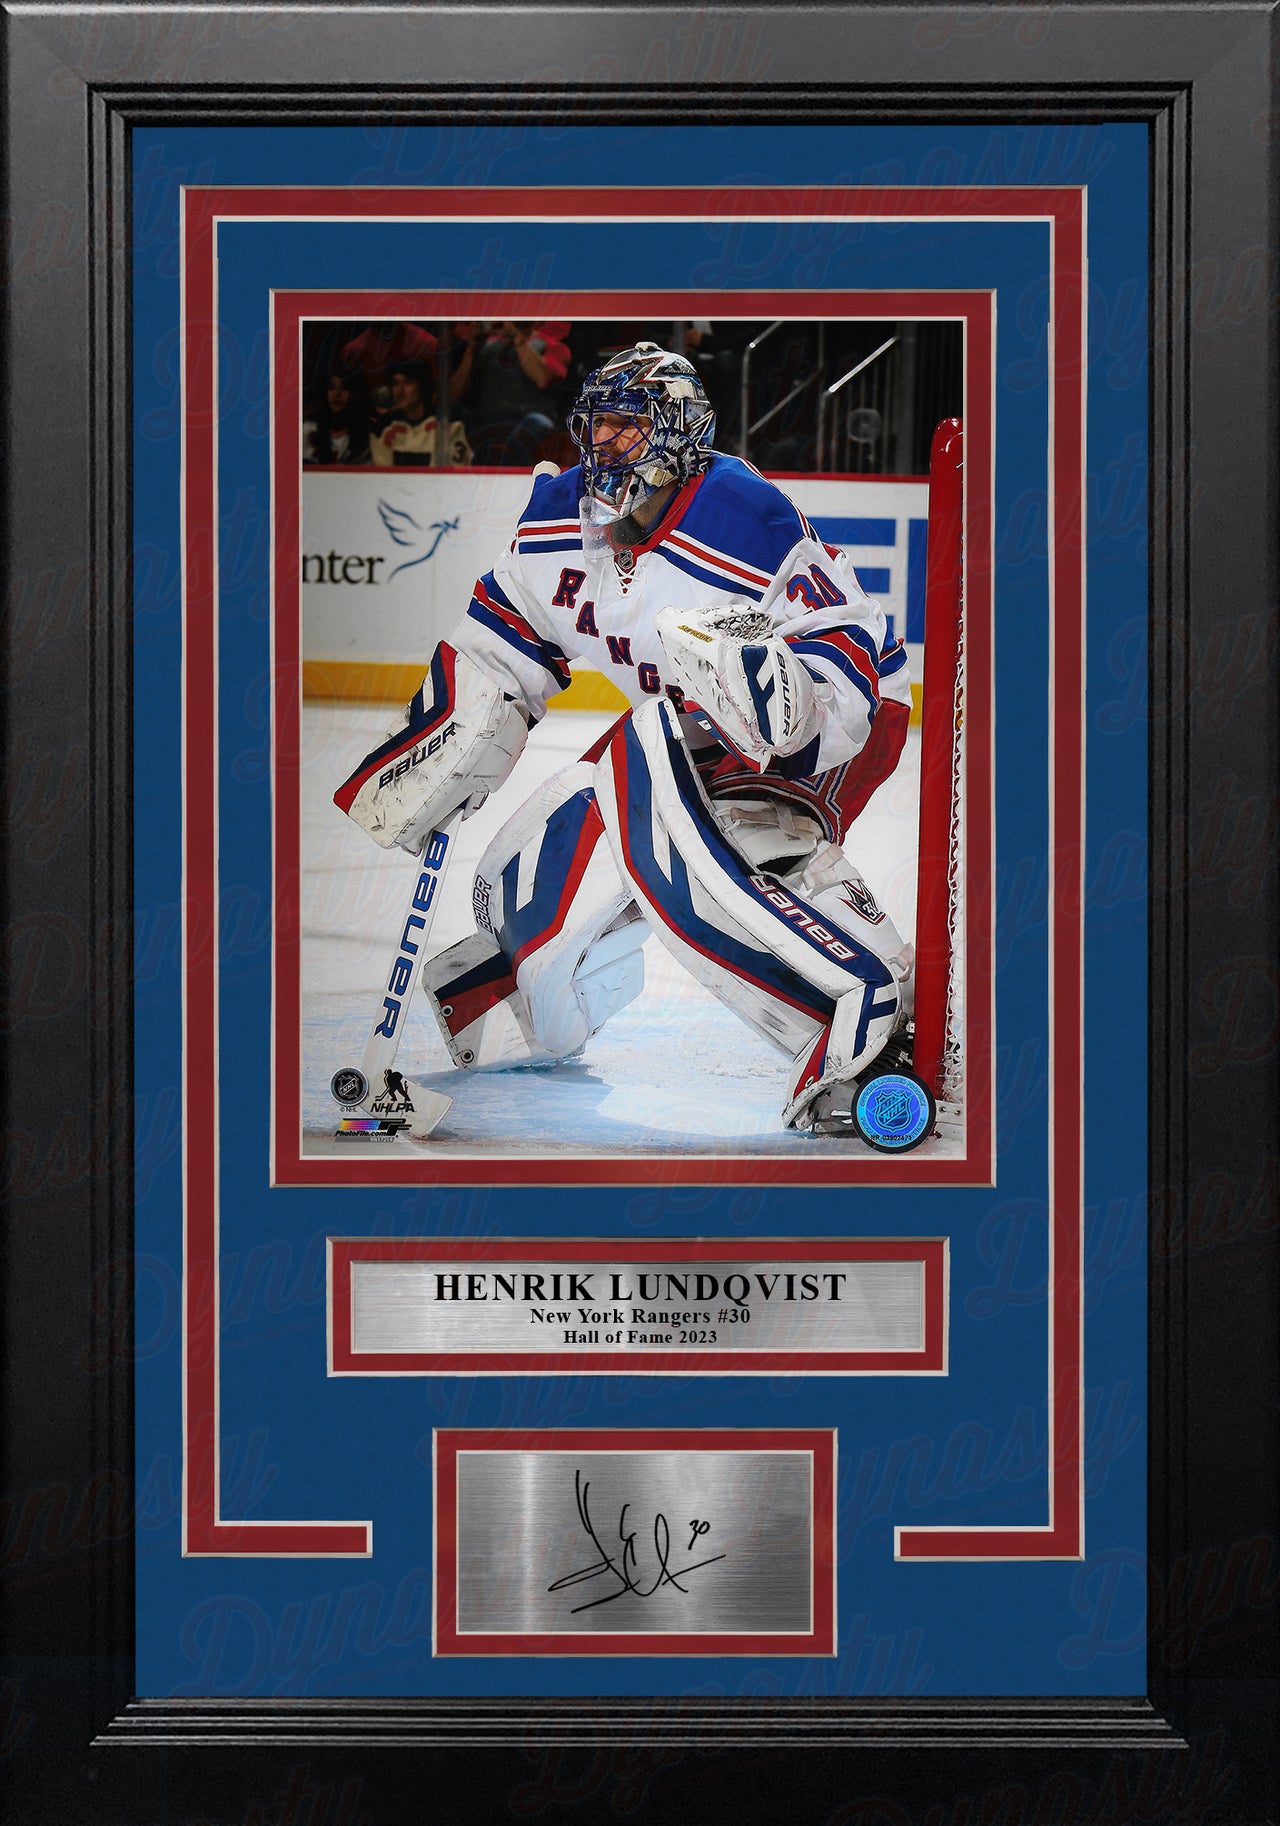 Henrik Lundqvist in Net New York Rangers 8" x 10" Framed Hockey Photo with Engraved Autograph